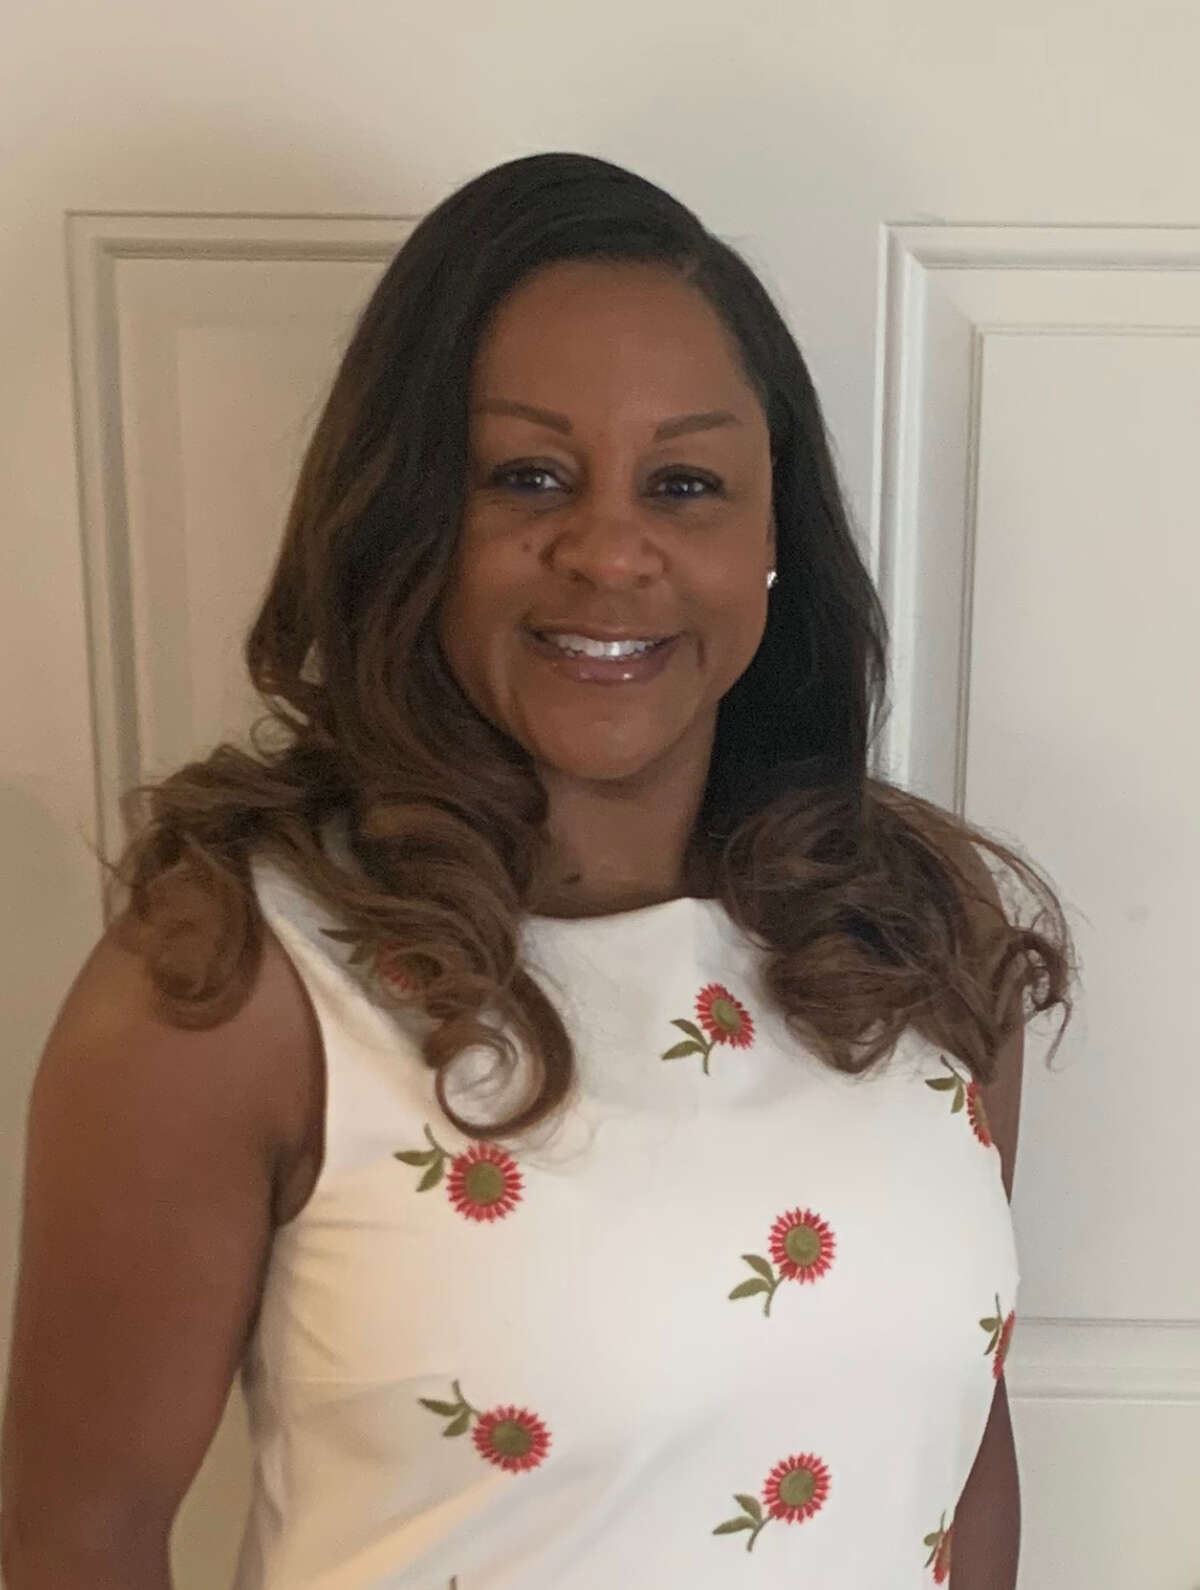  Latisha Ellis-Williams will start in July 2022 as Bethlehem school's first diversity, equity and inclusion officer.